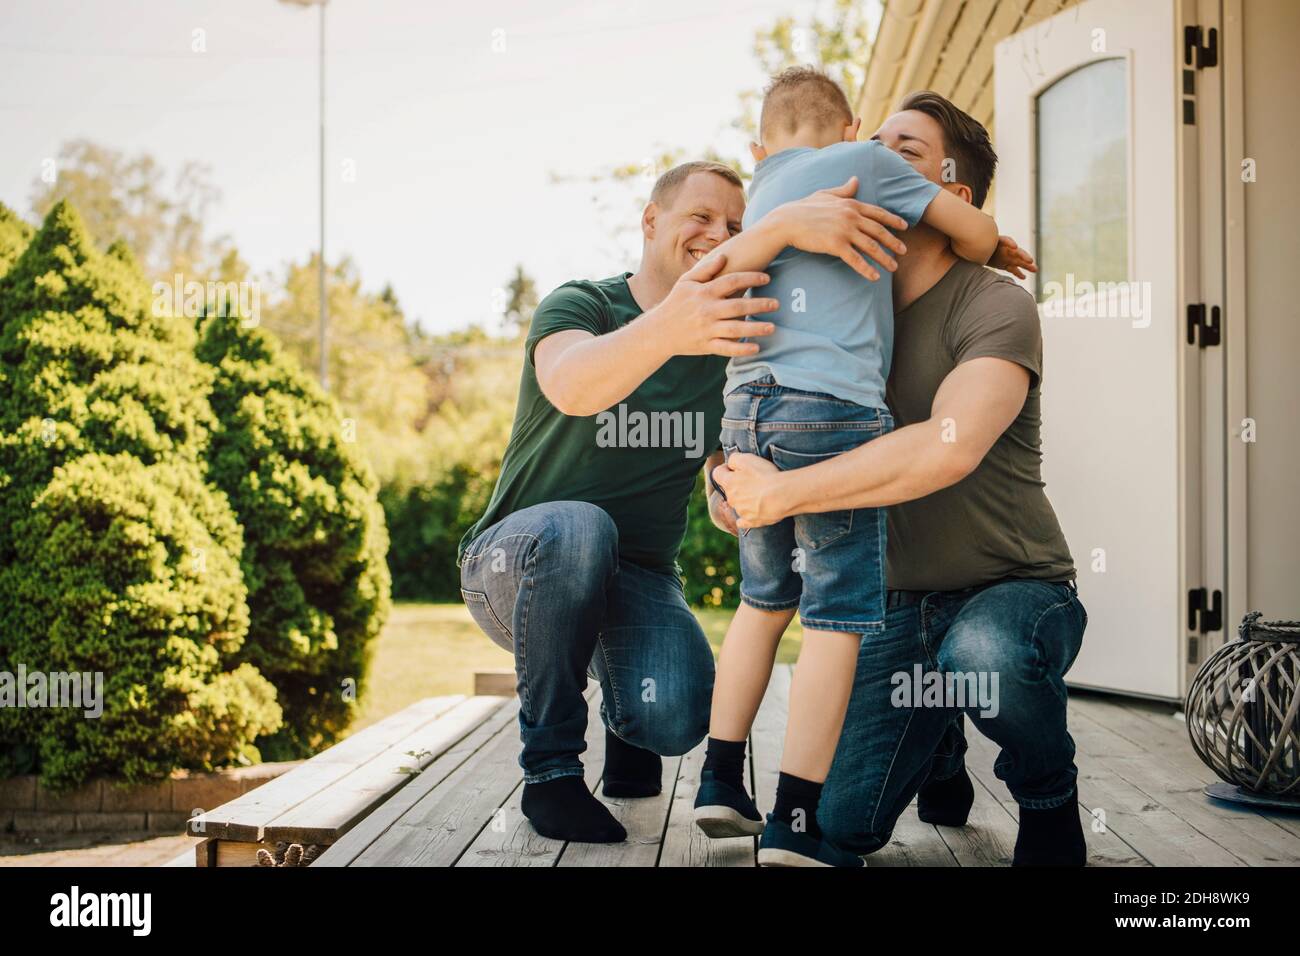 Homosexual fathers embracing son while crouching on patio during sunny day Stock Photo